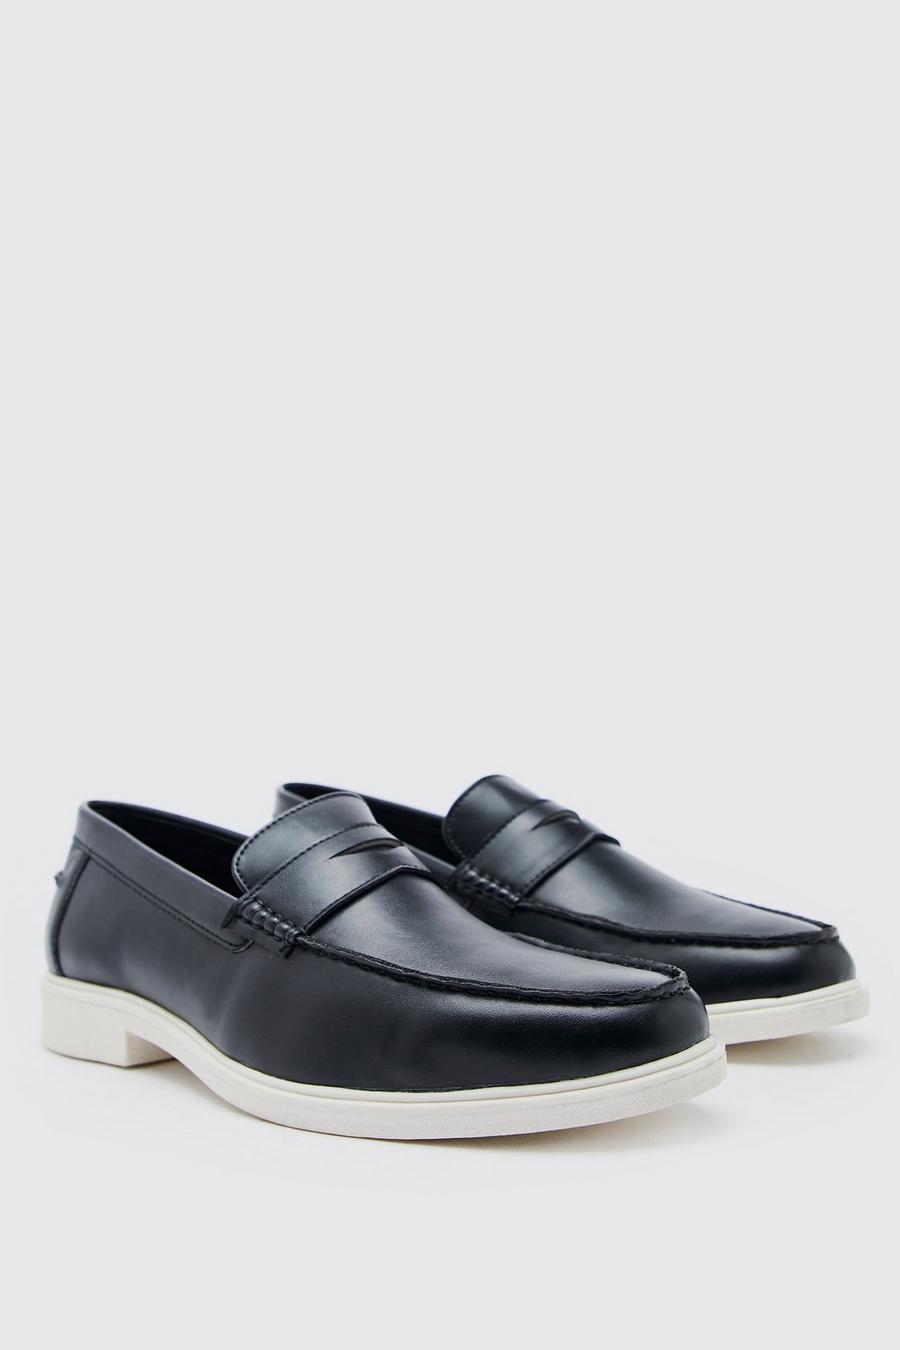 Black Faux Leather Contrast Sole Penny Loafer